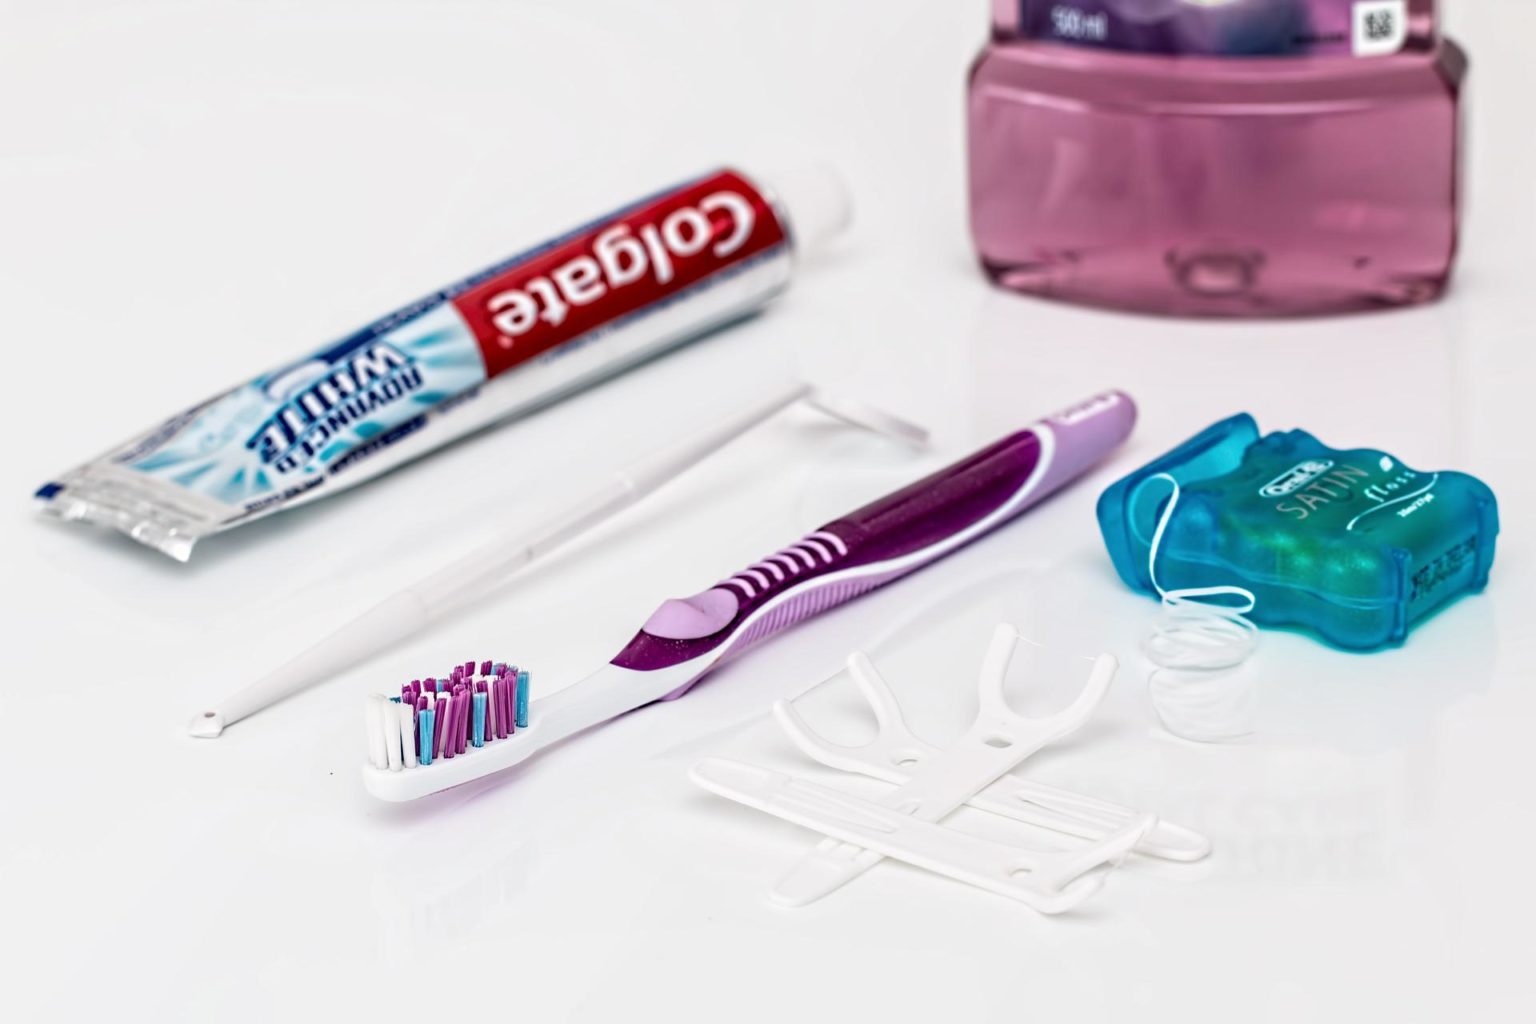 A toothbrush with floss on a white surface